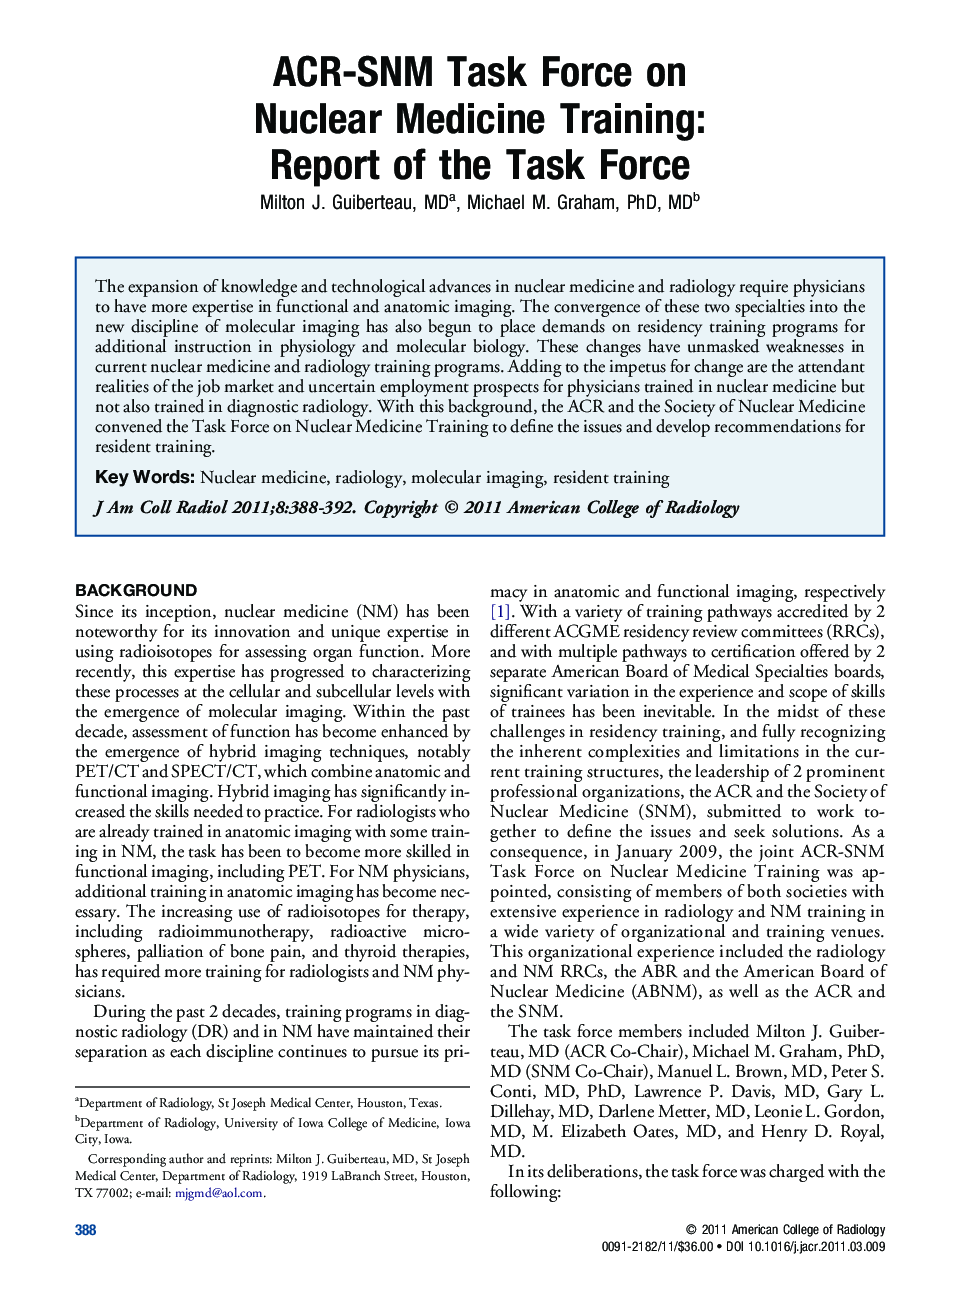 ACR-SNM Task Force on Nuclear Medicine Training: Report of the Task Force